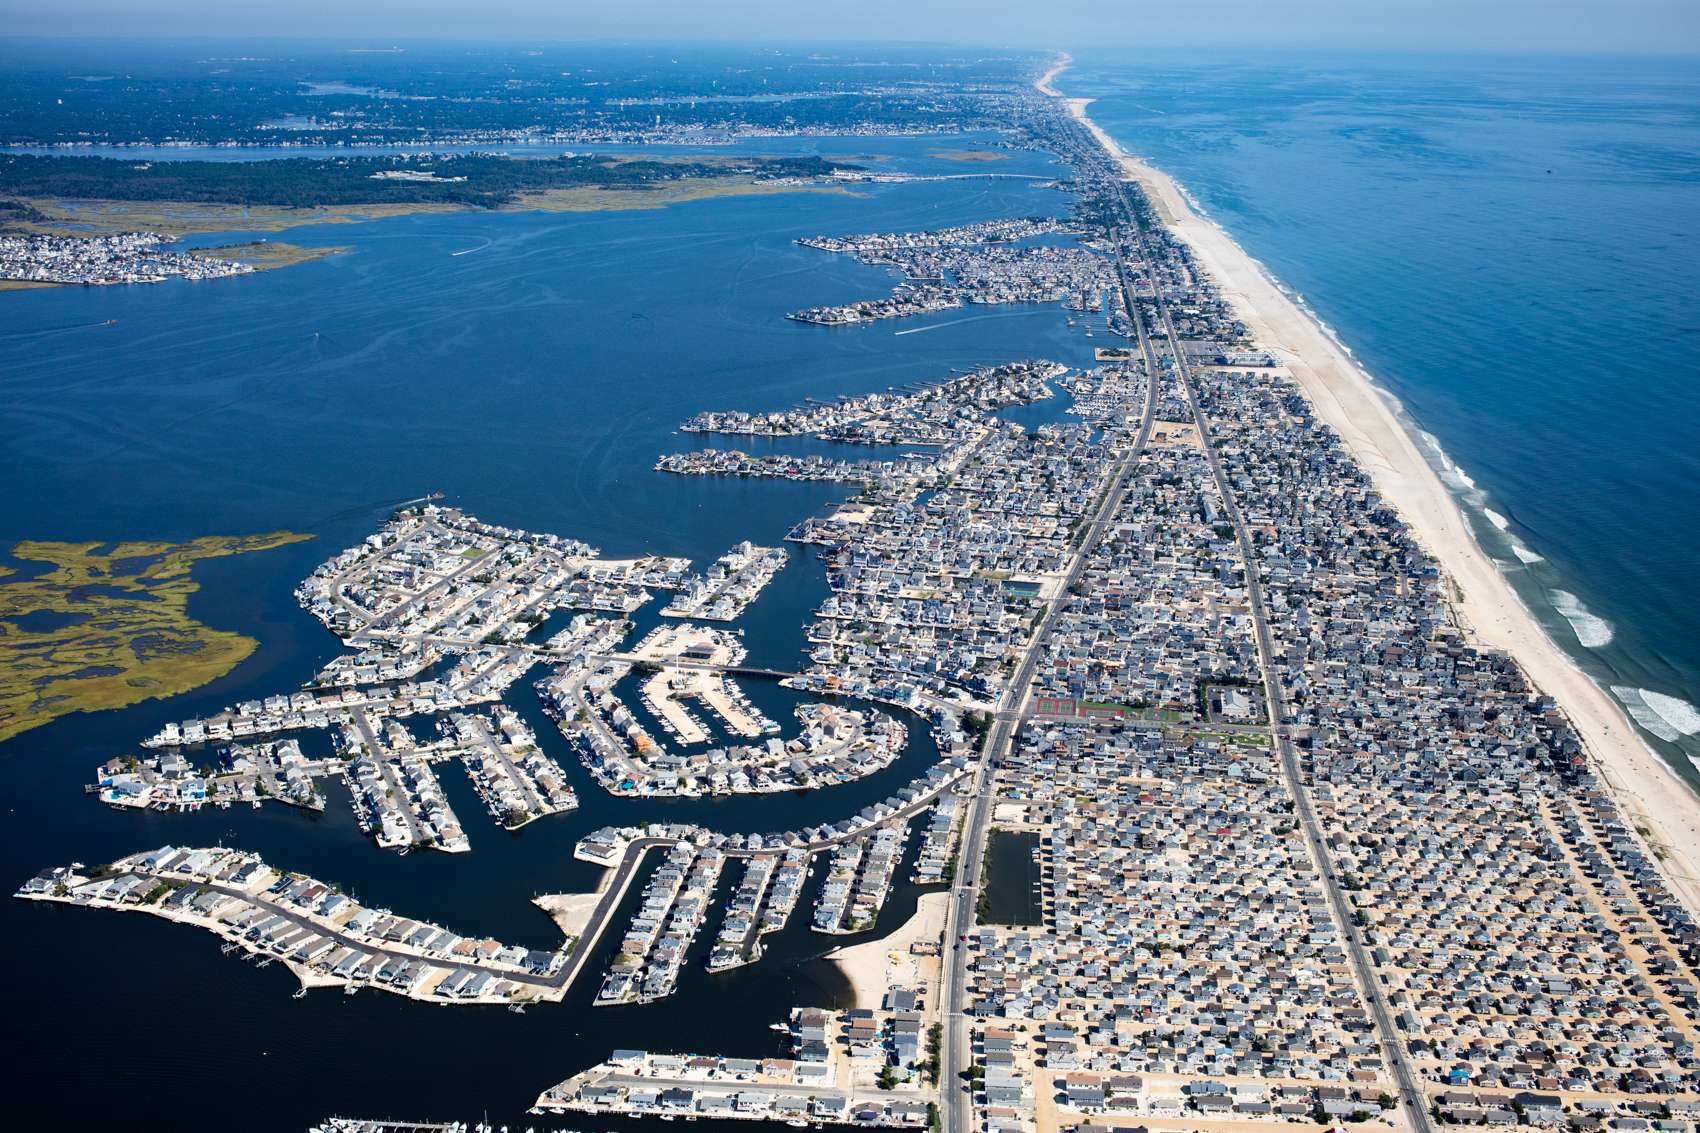 Cut and filled lagoon keys are built behind a barrier island in Lavallette, New Jersey, demonstrating the demand for waterfront real estate.